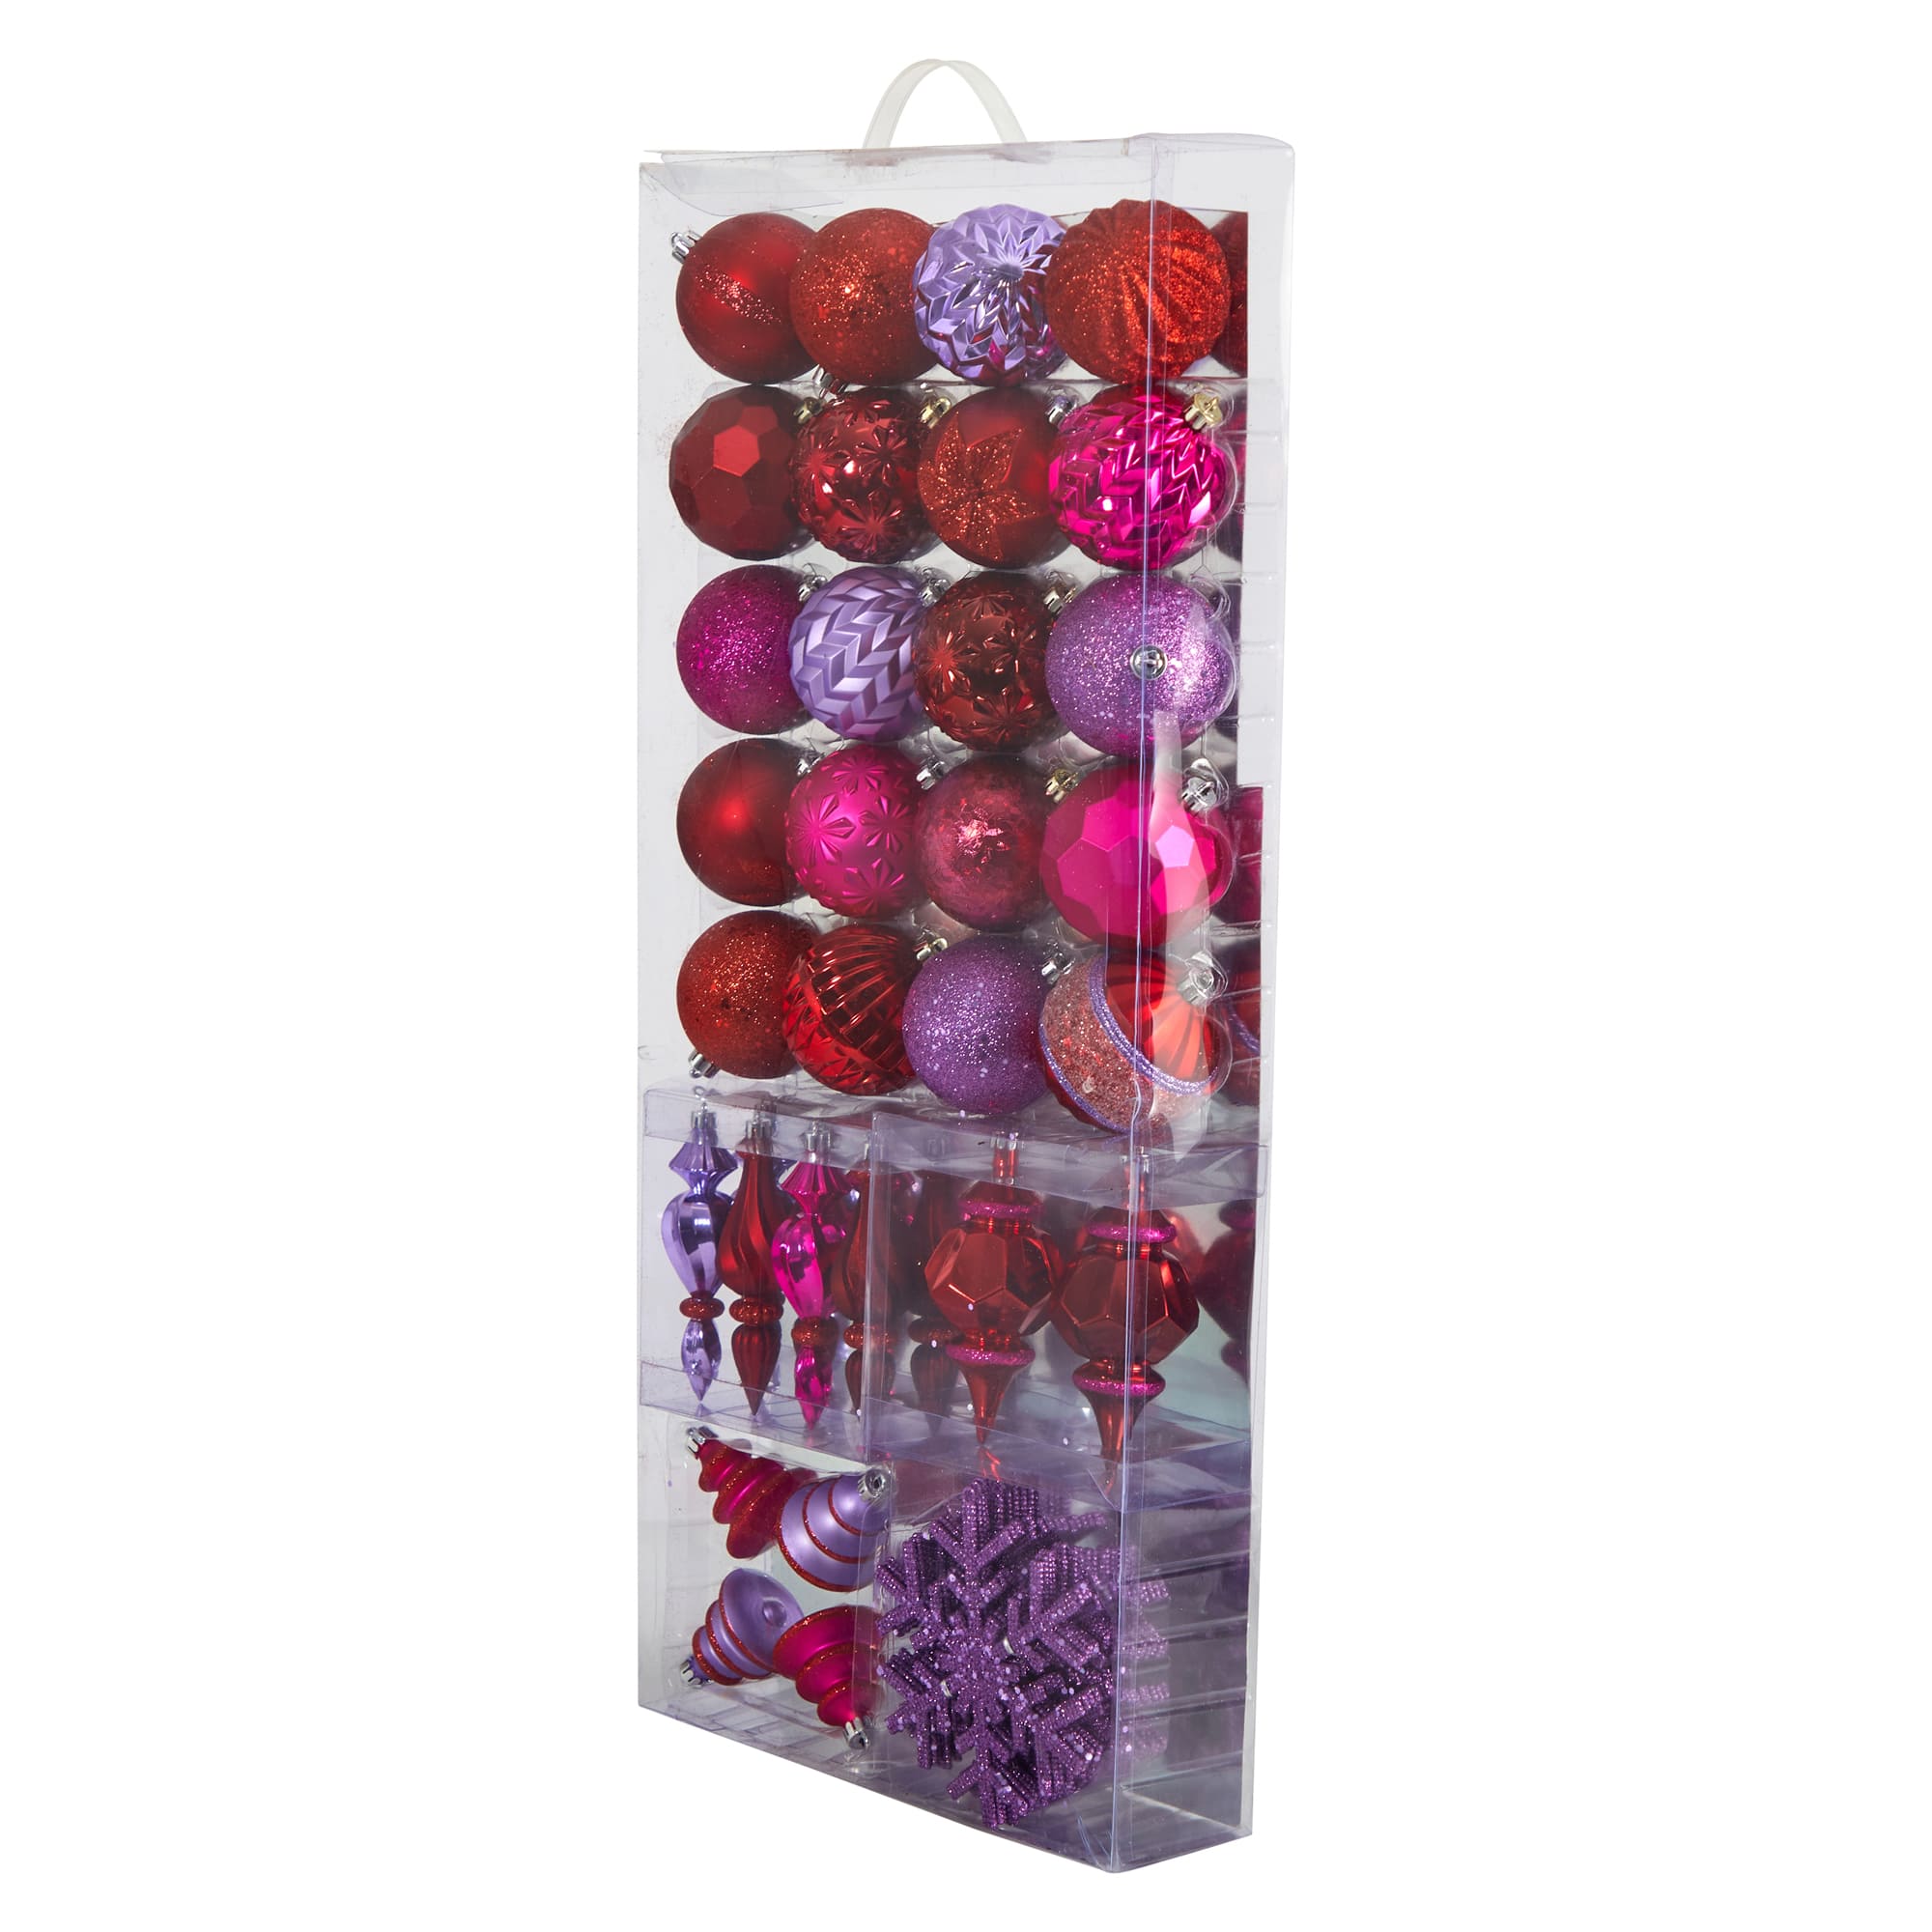 50ct. Holiday Deluxe Shatterproof Christmas Tree Ornament Box Set